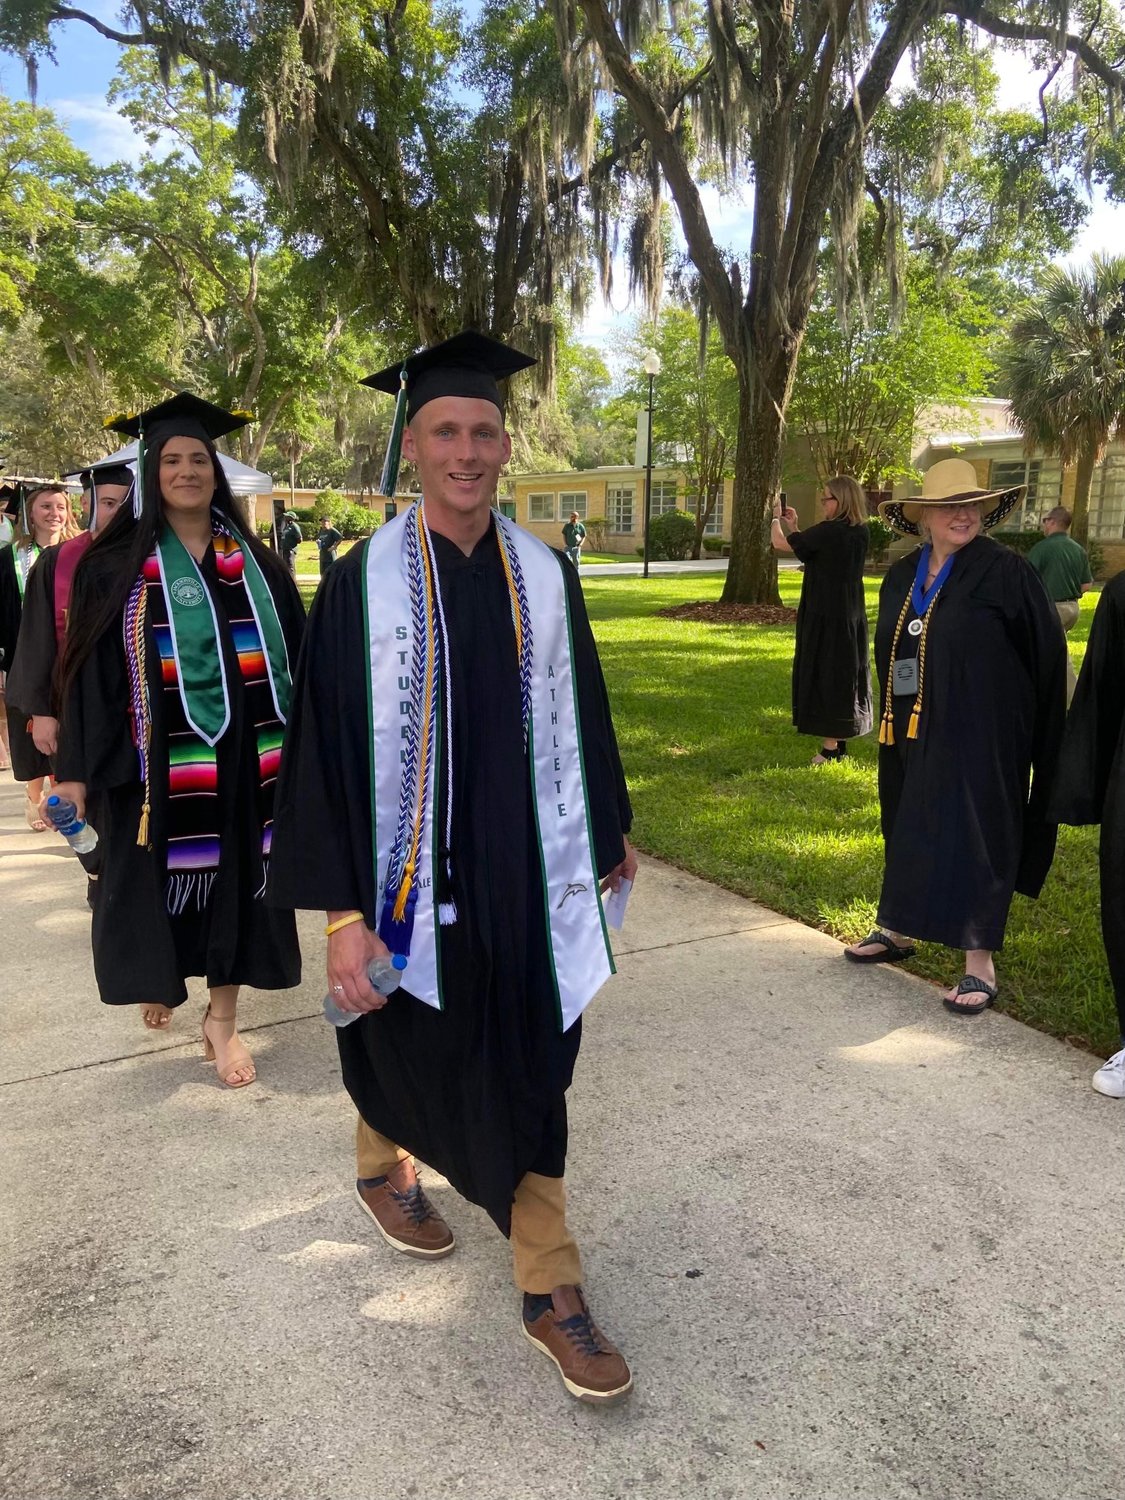 McGuinness never let anything stop him, having graduating from Jacksonville University with a degree in psychology while enrolled in the Naval ROTC.